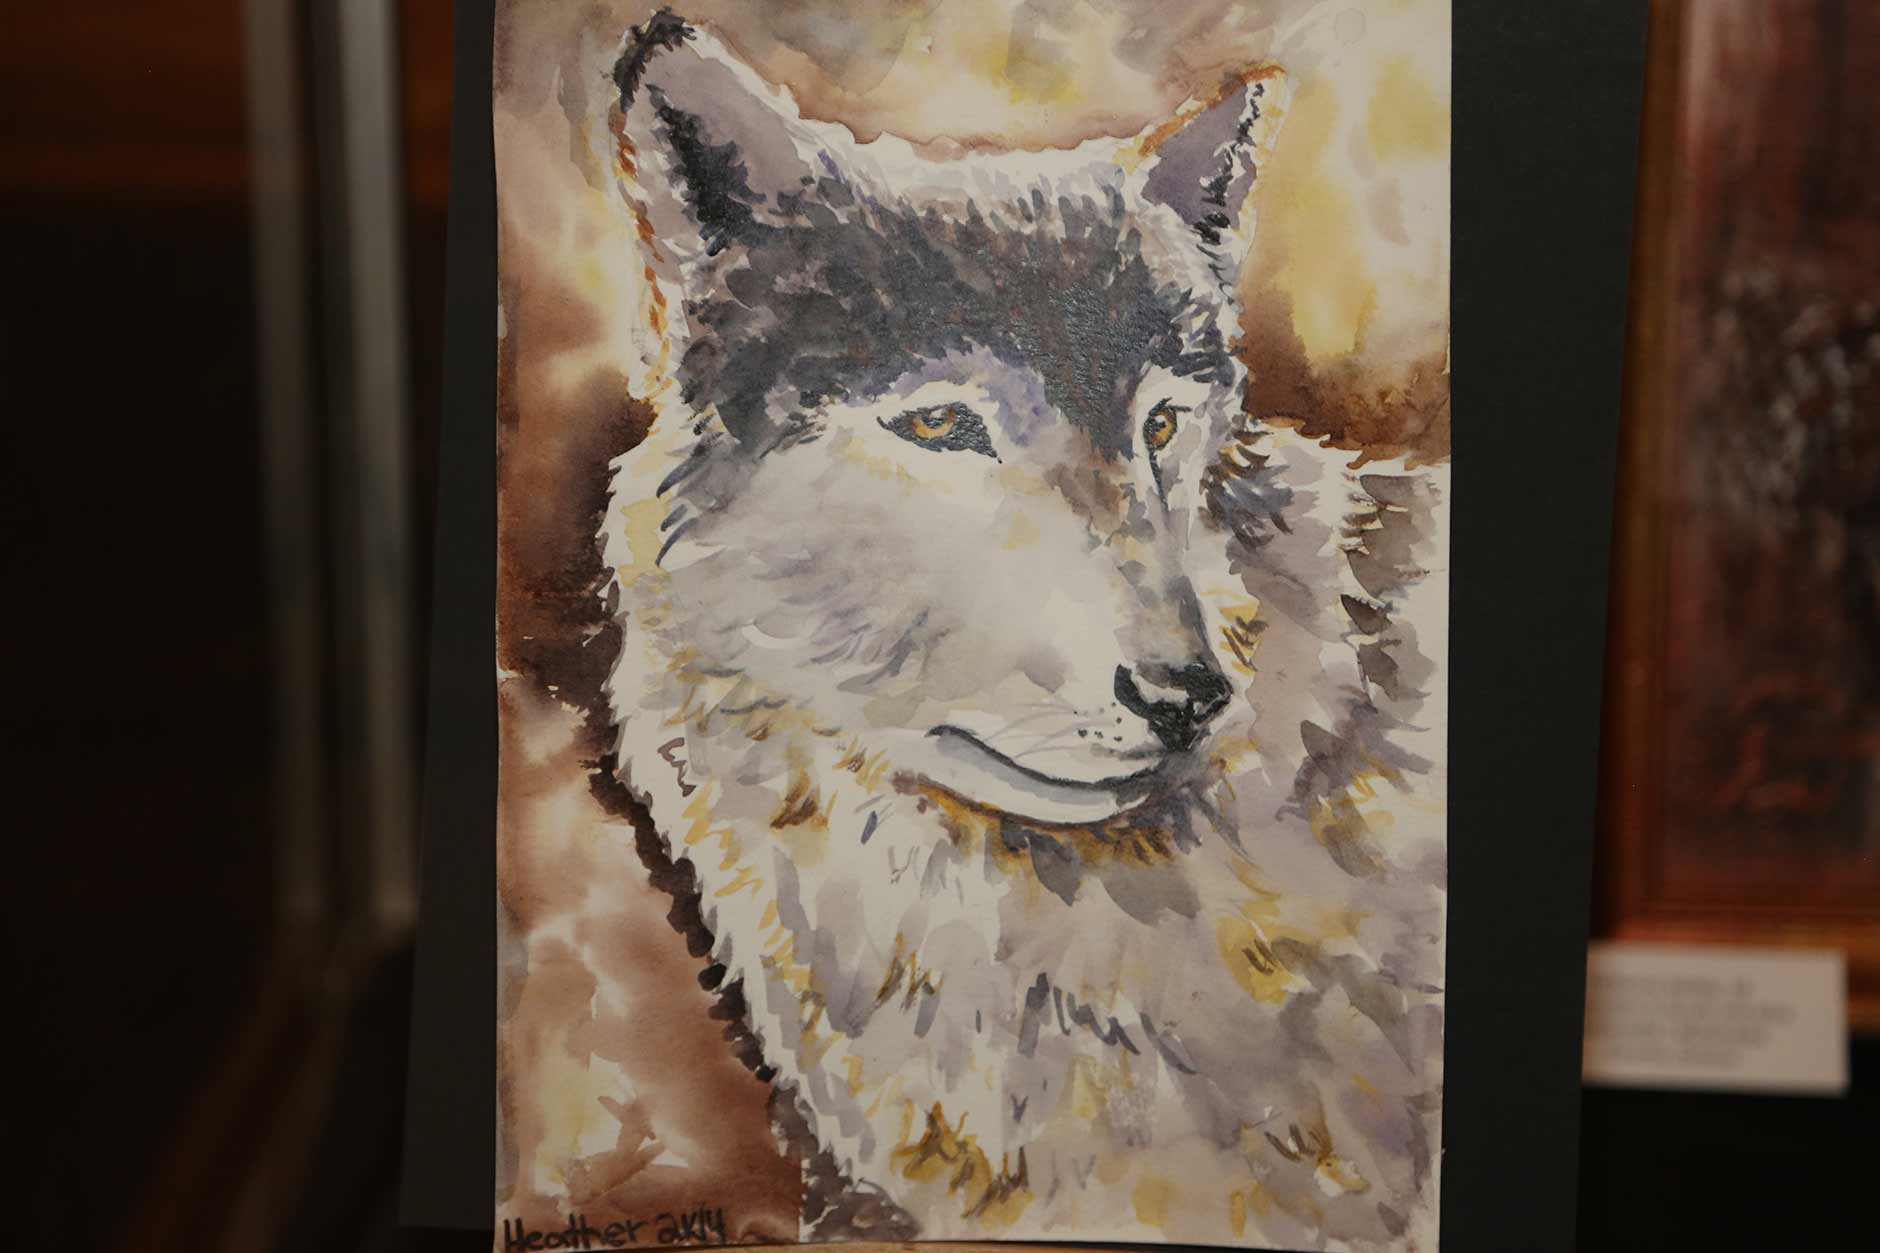 A painting by a student artist in the 2014 Youth Arts Program